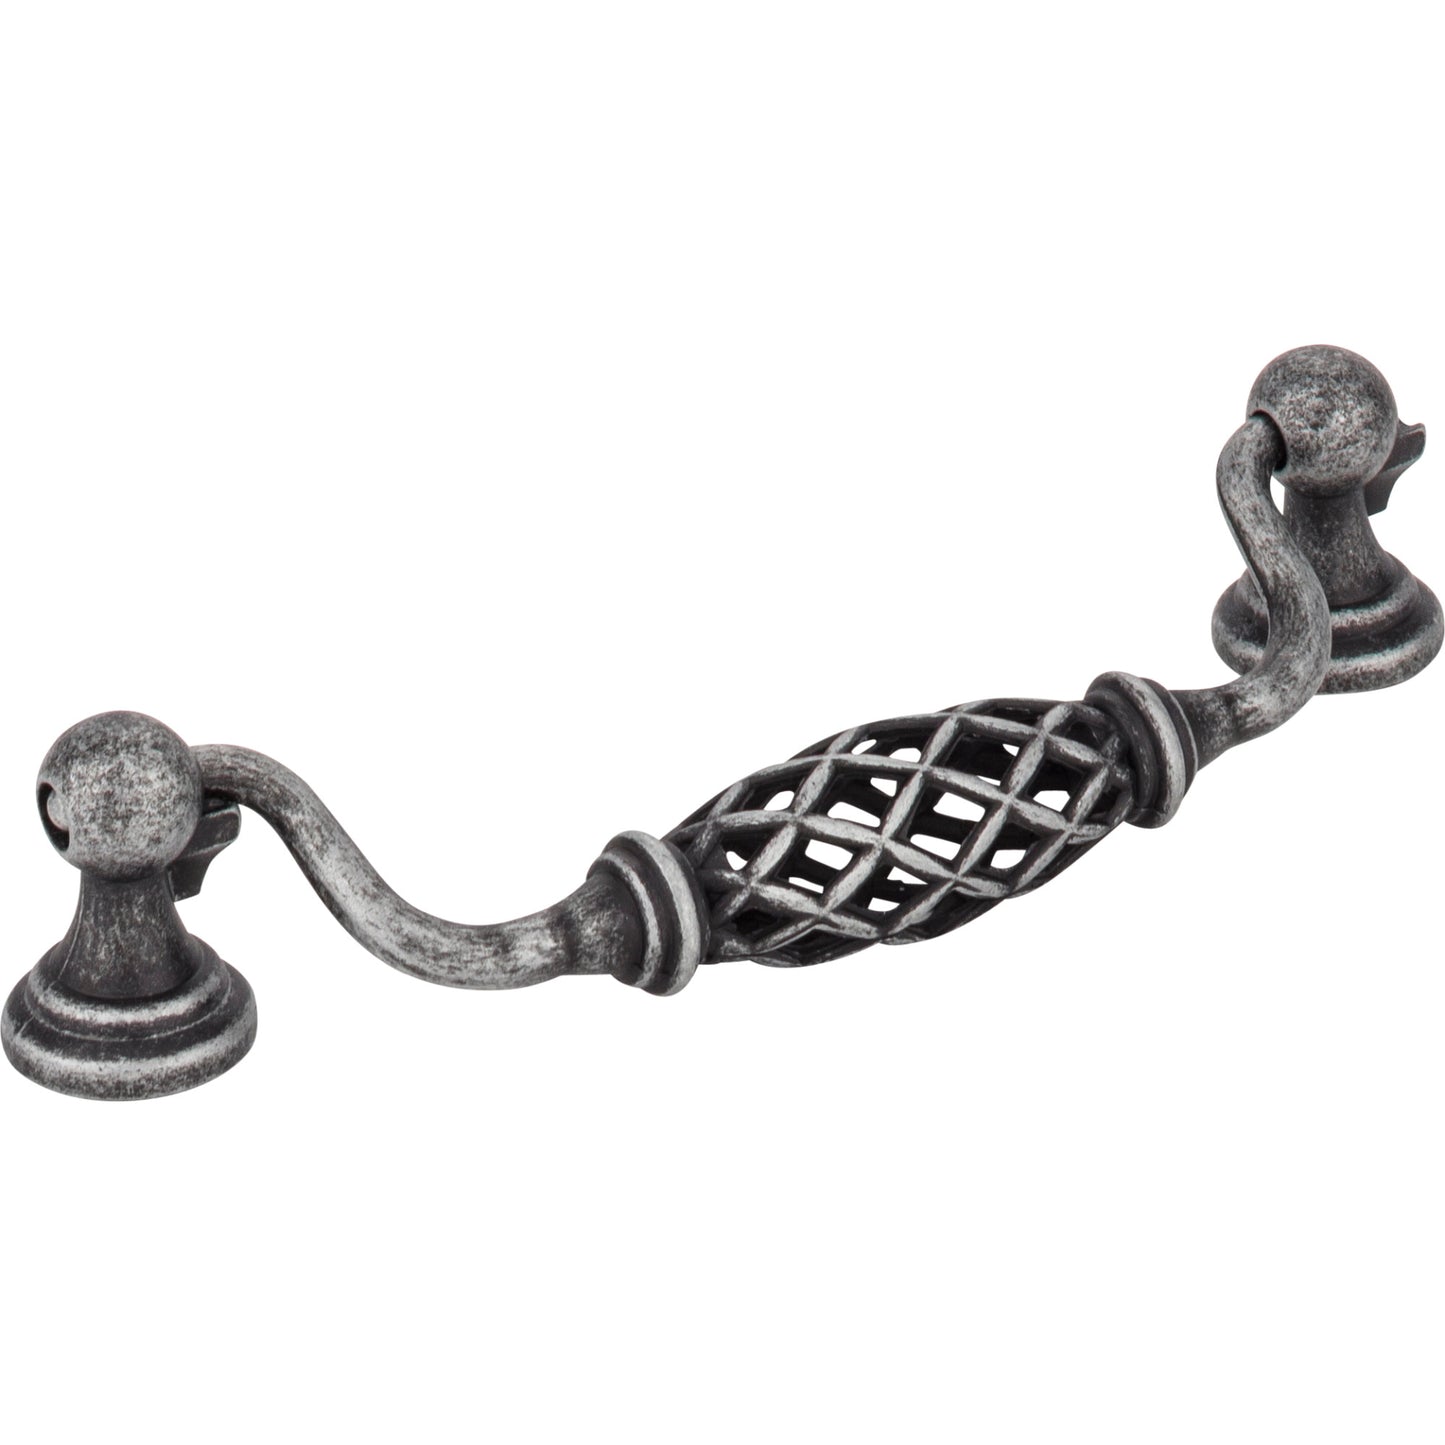 JEFFREY ALEXANDER 749-128SIM 128 mm Center-to-Center Distressed Antique Silver Birdcage Tuscany Drop & Ring Pull